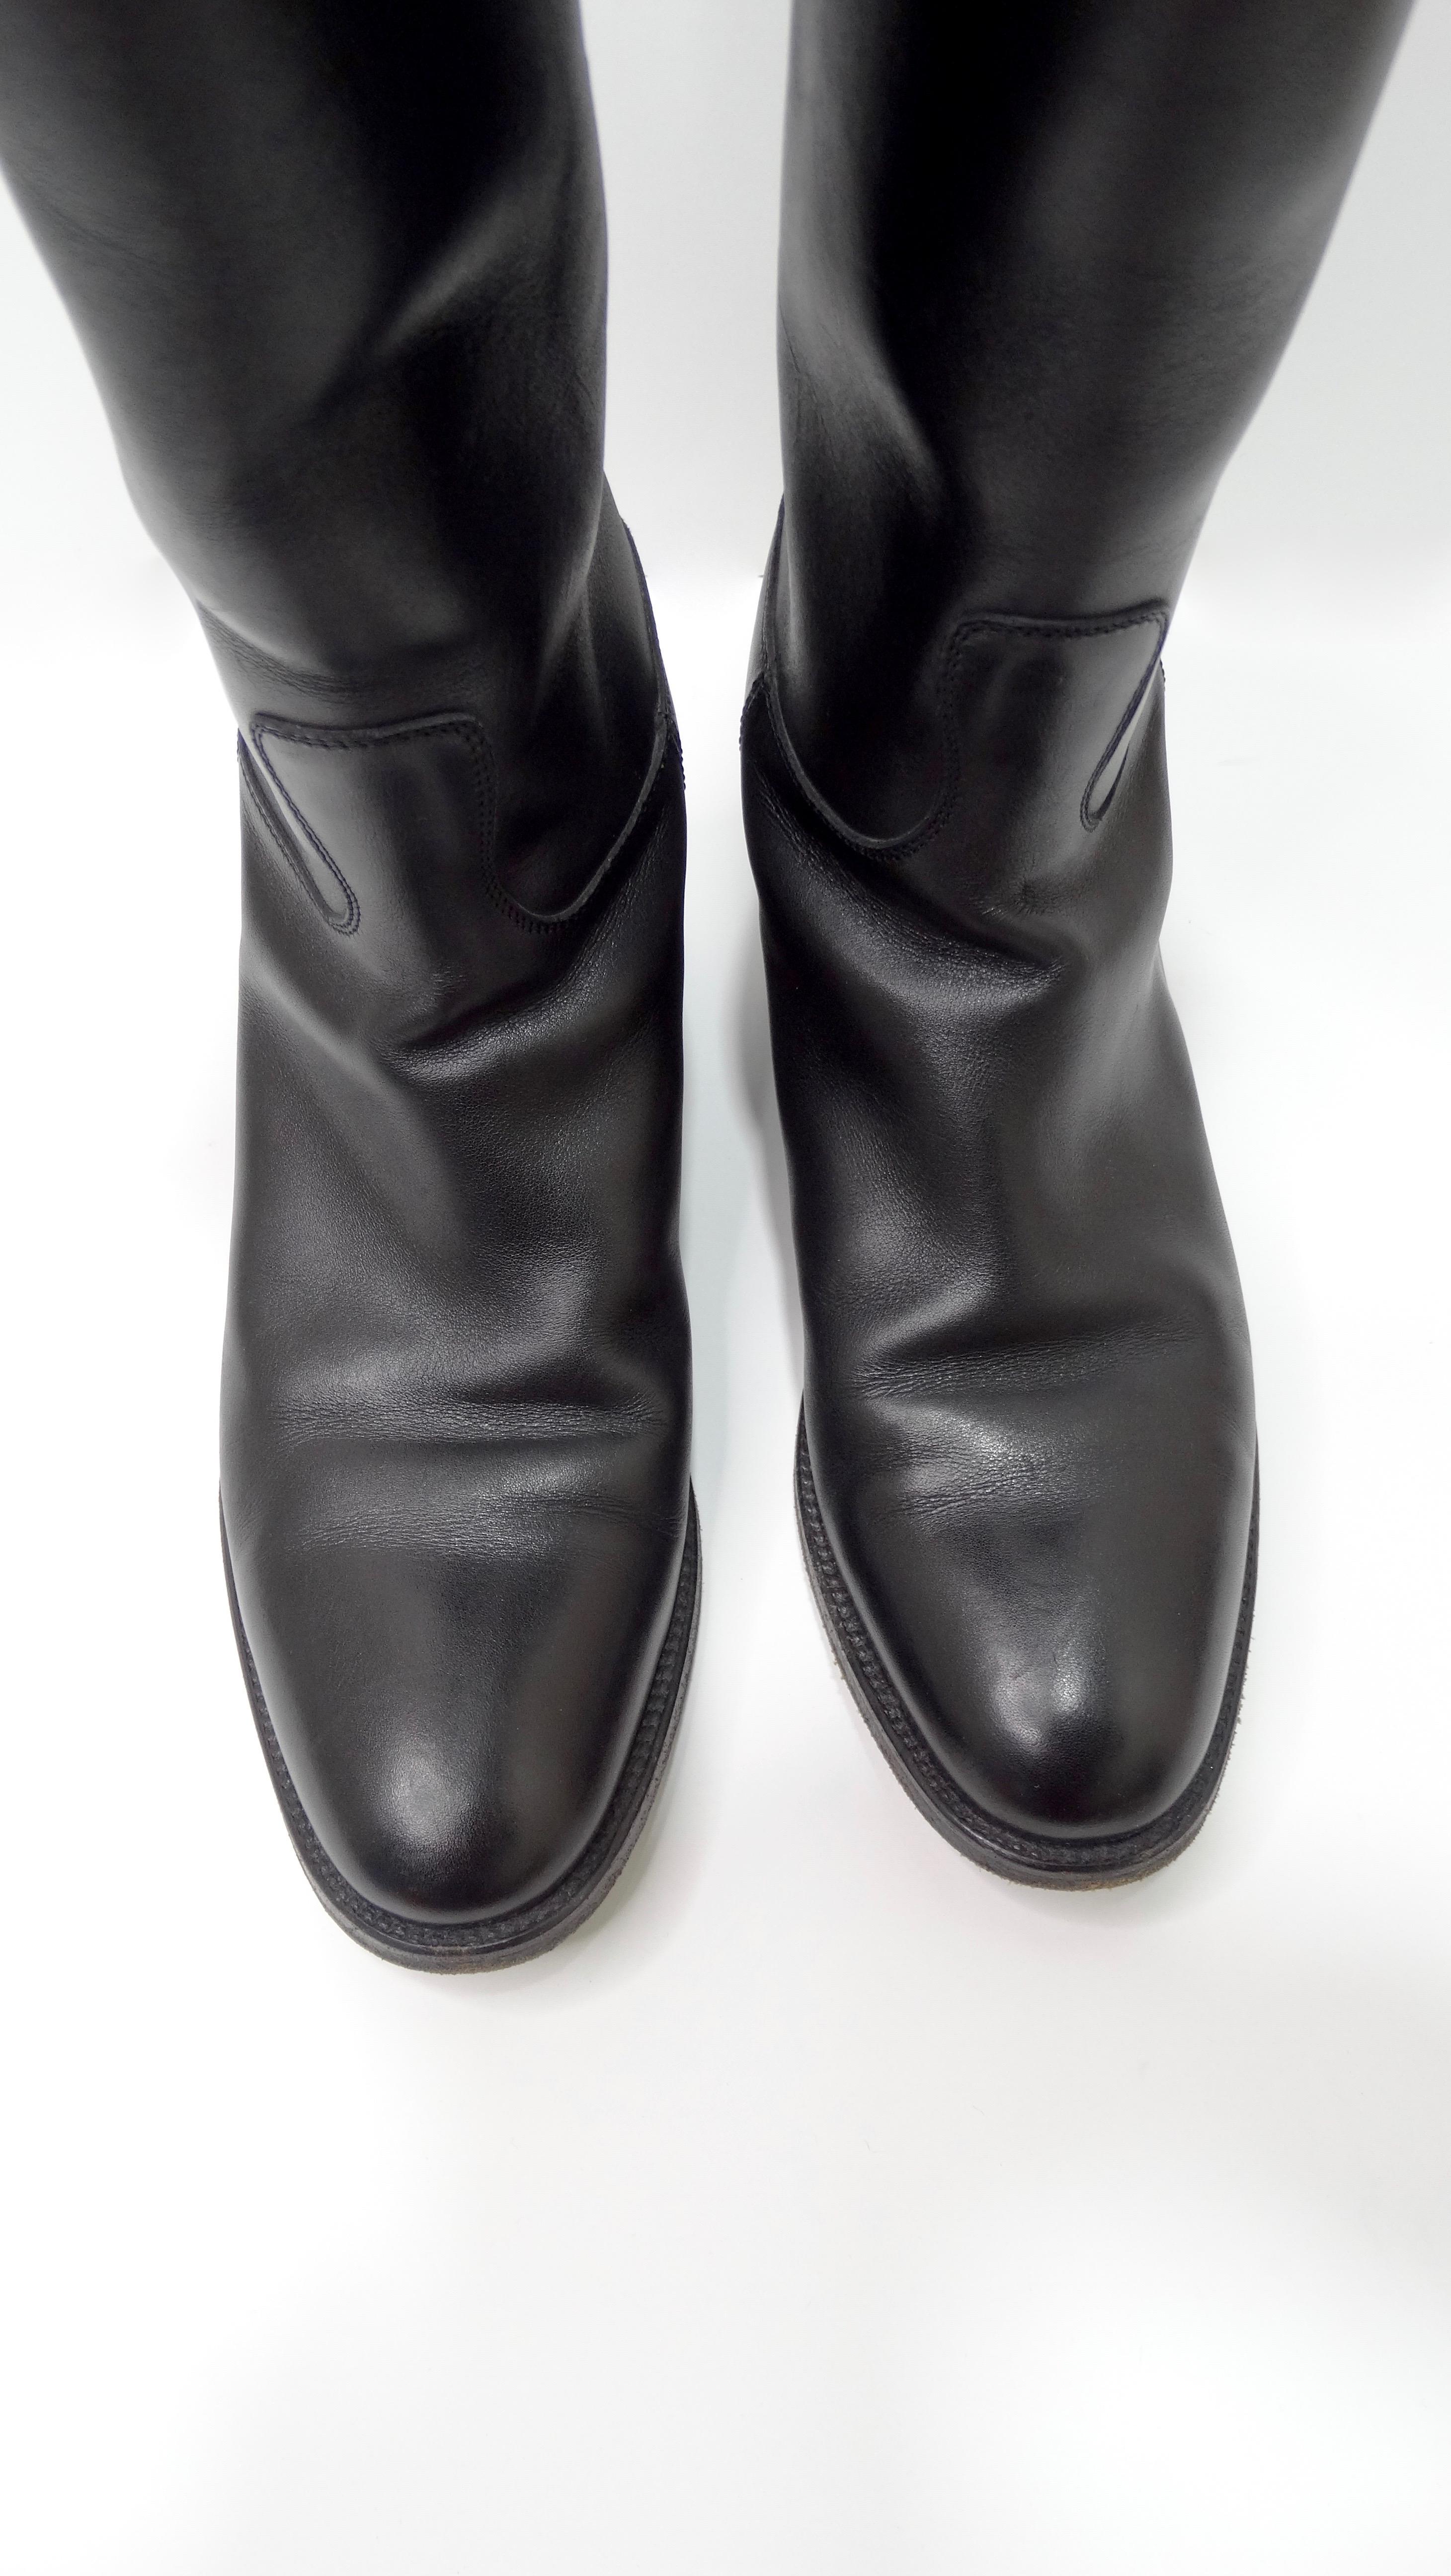 Hermés Black Box Leather Jumping Boot  In Good Condition For Sale In Scottsdale, AZ